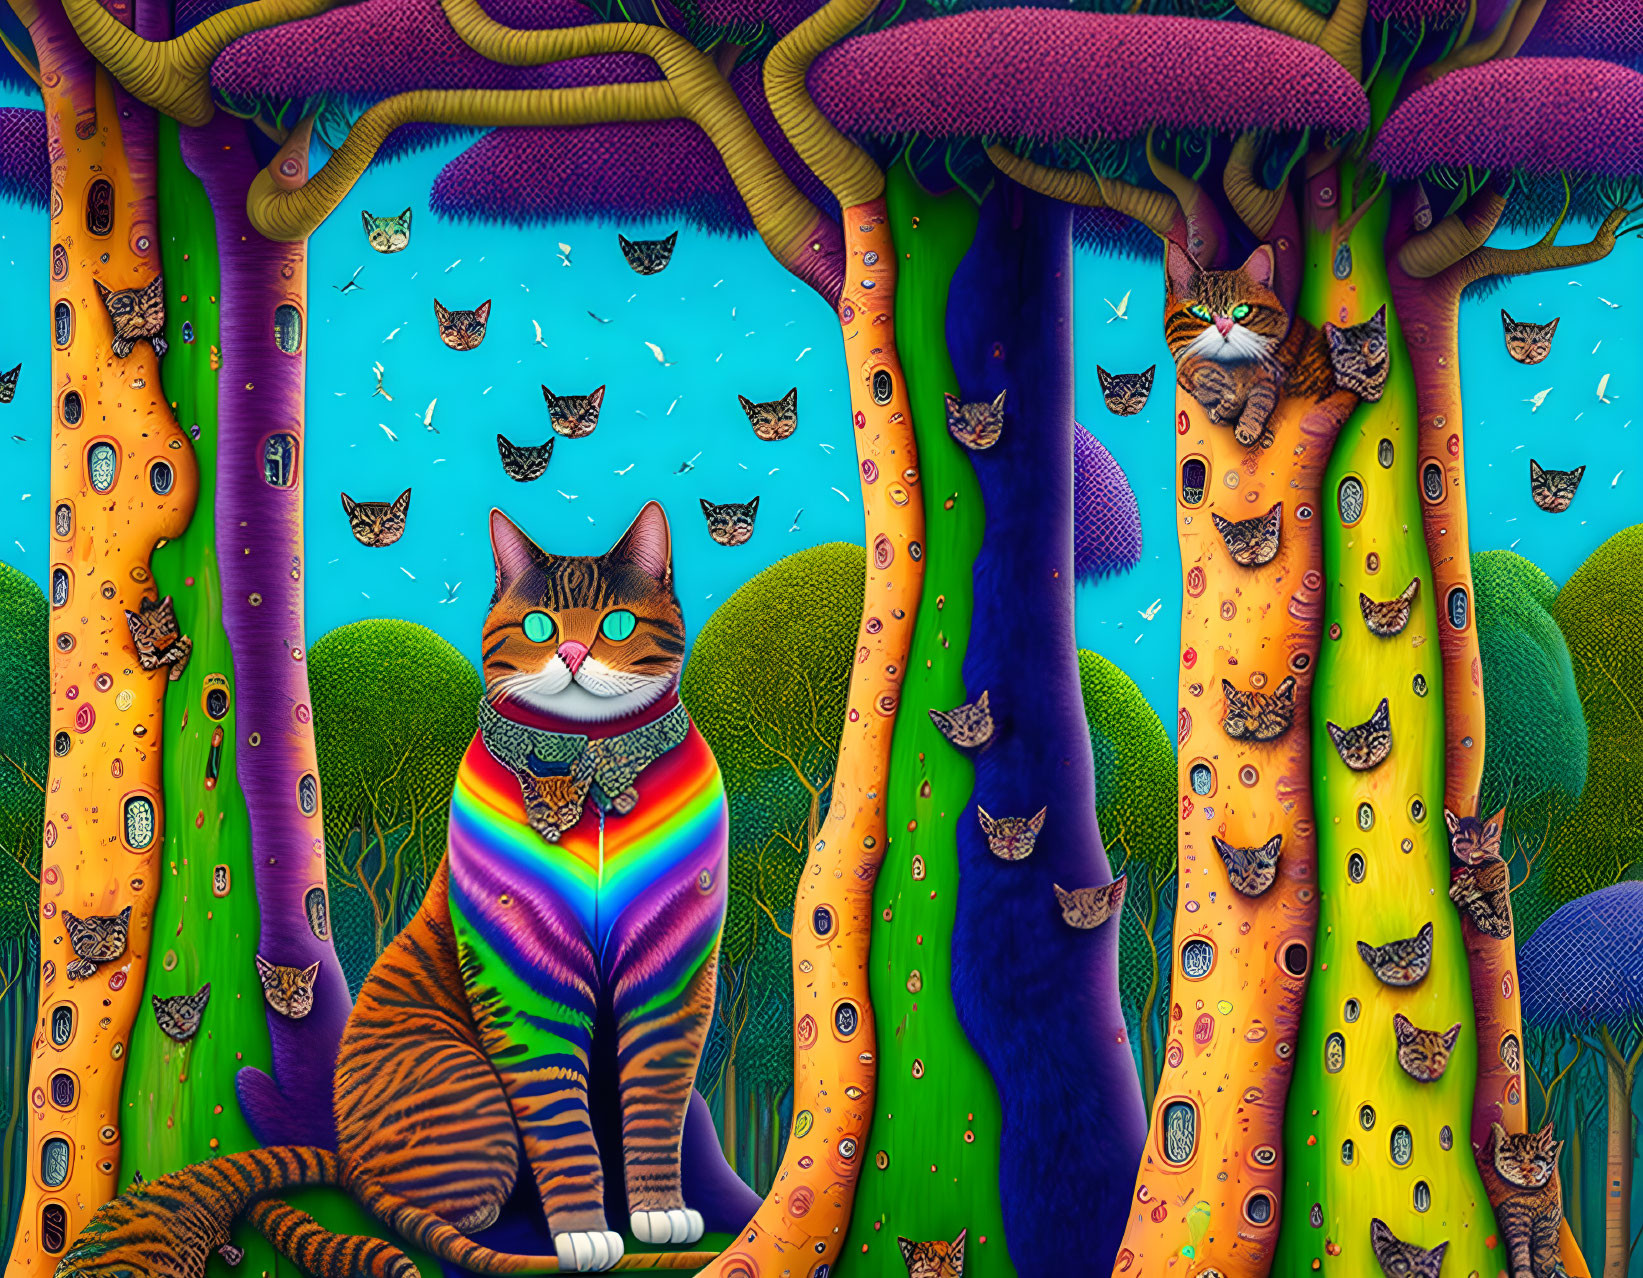 Colorful patterned trees and flying cat-faces in a whimsical forest scene